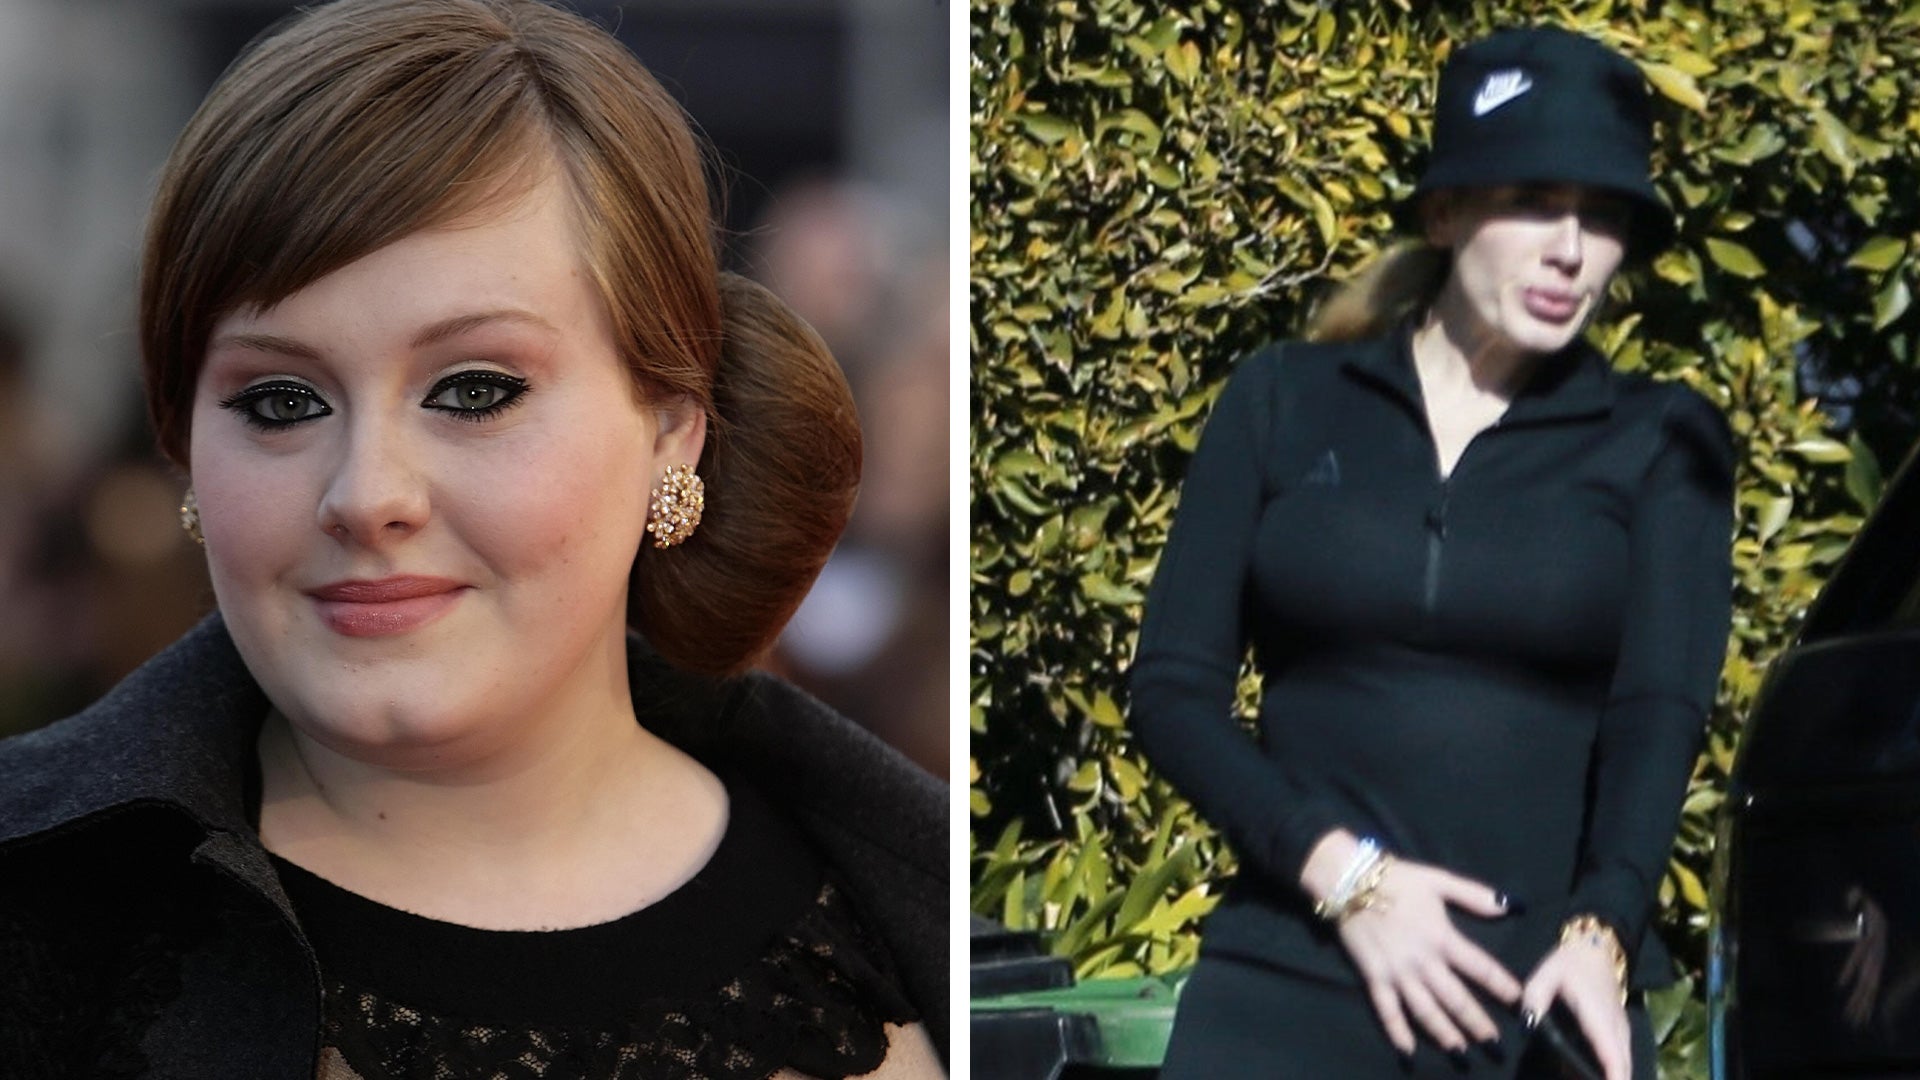 Adele Shows Off Massive 100-Pound Weight Loss